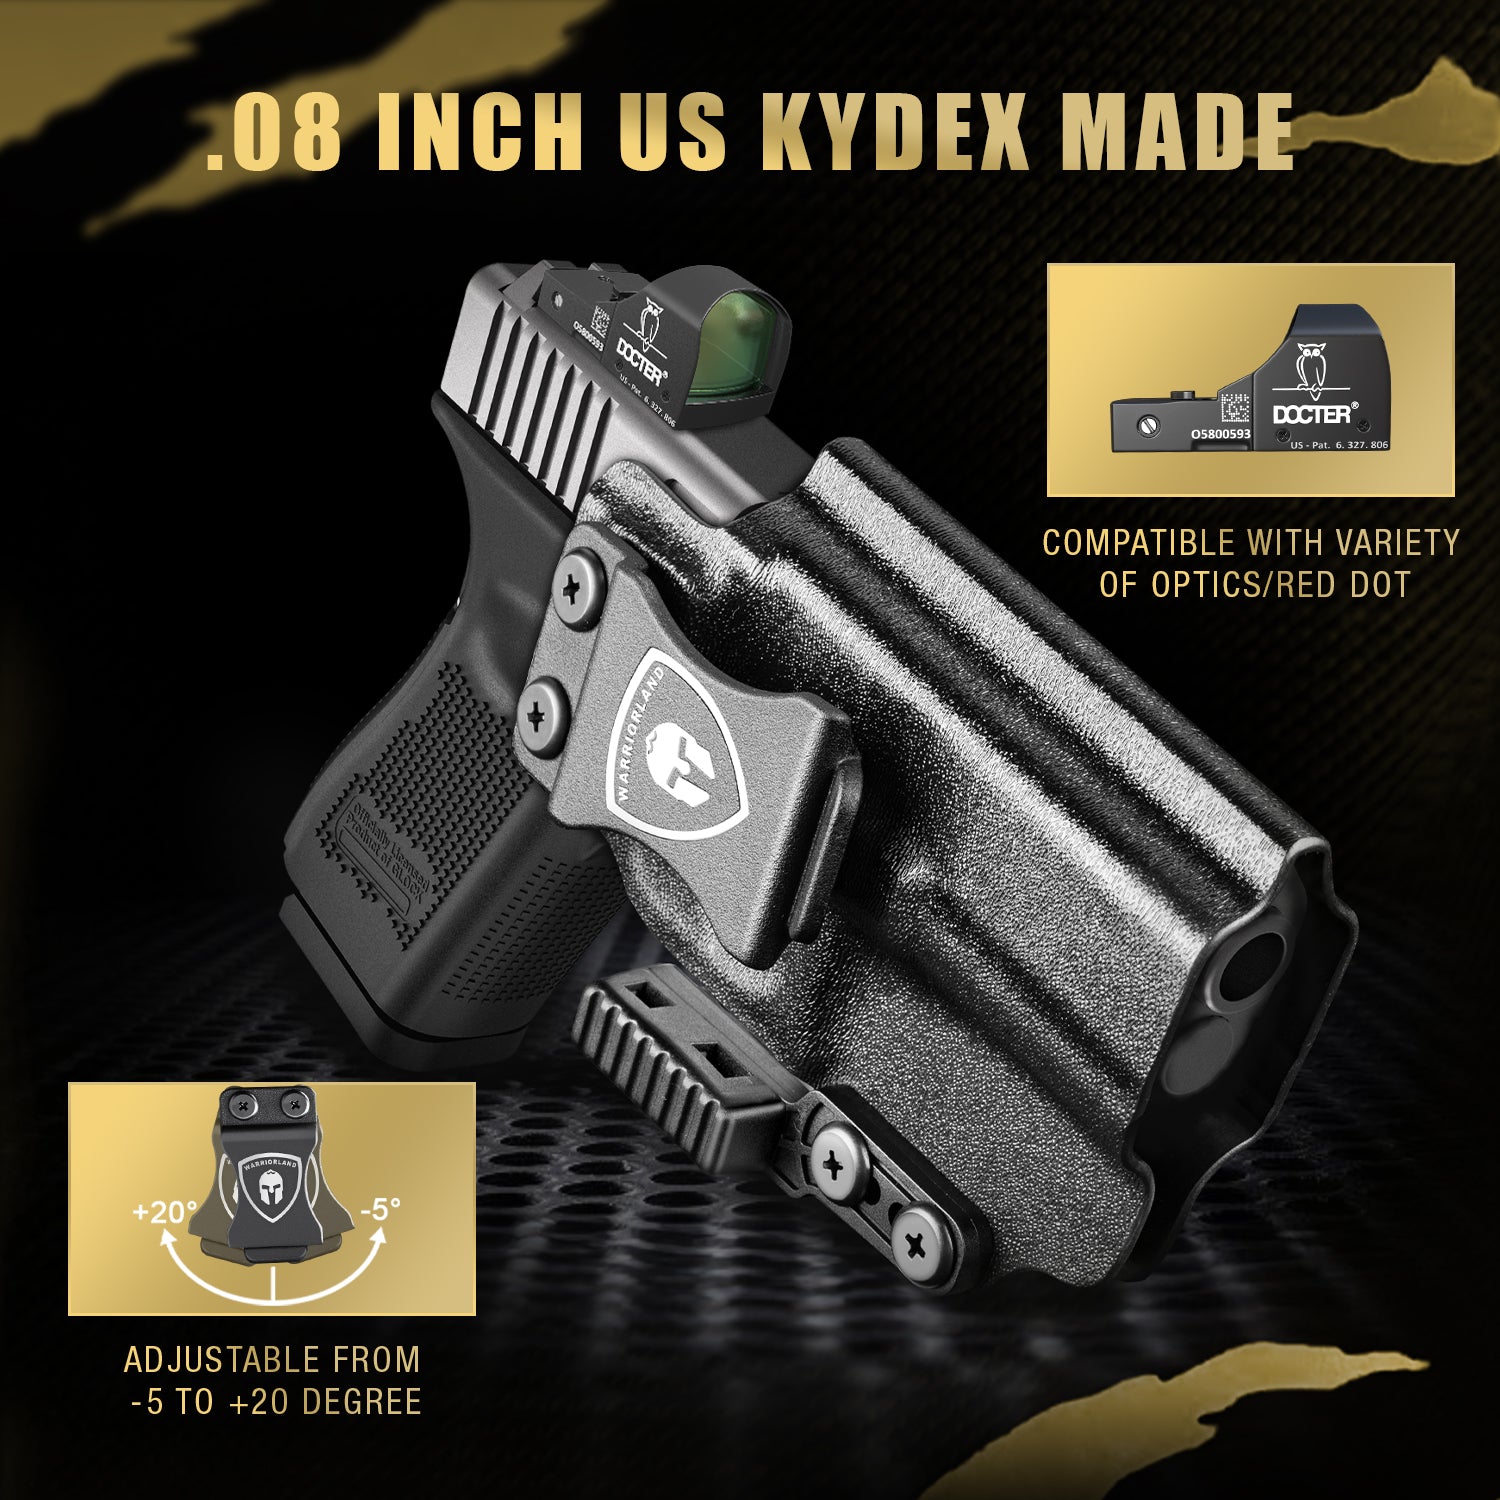 Compatible with Glock 19 IWB Kydex Holster with Claw and Optic Cut: G19/19X/44/45 Gen 1-5 & G23/32 Gen 3-4, Inside Waistband Appendix Carry G19 Holster, Adj. Cant & Retention, Right Hand|WARRIORLAND